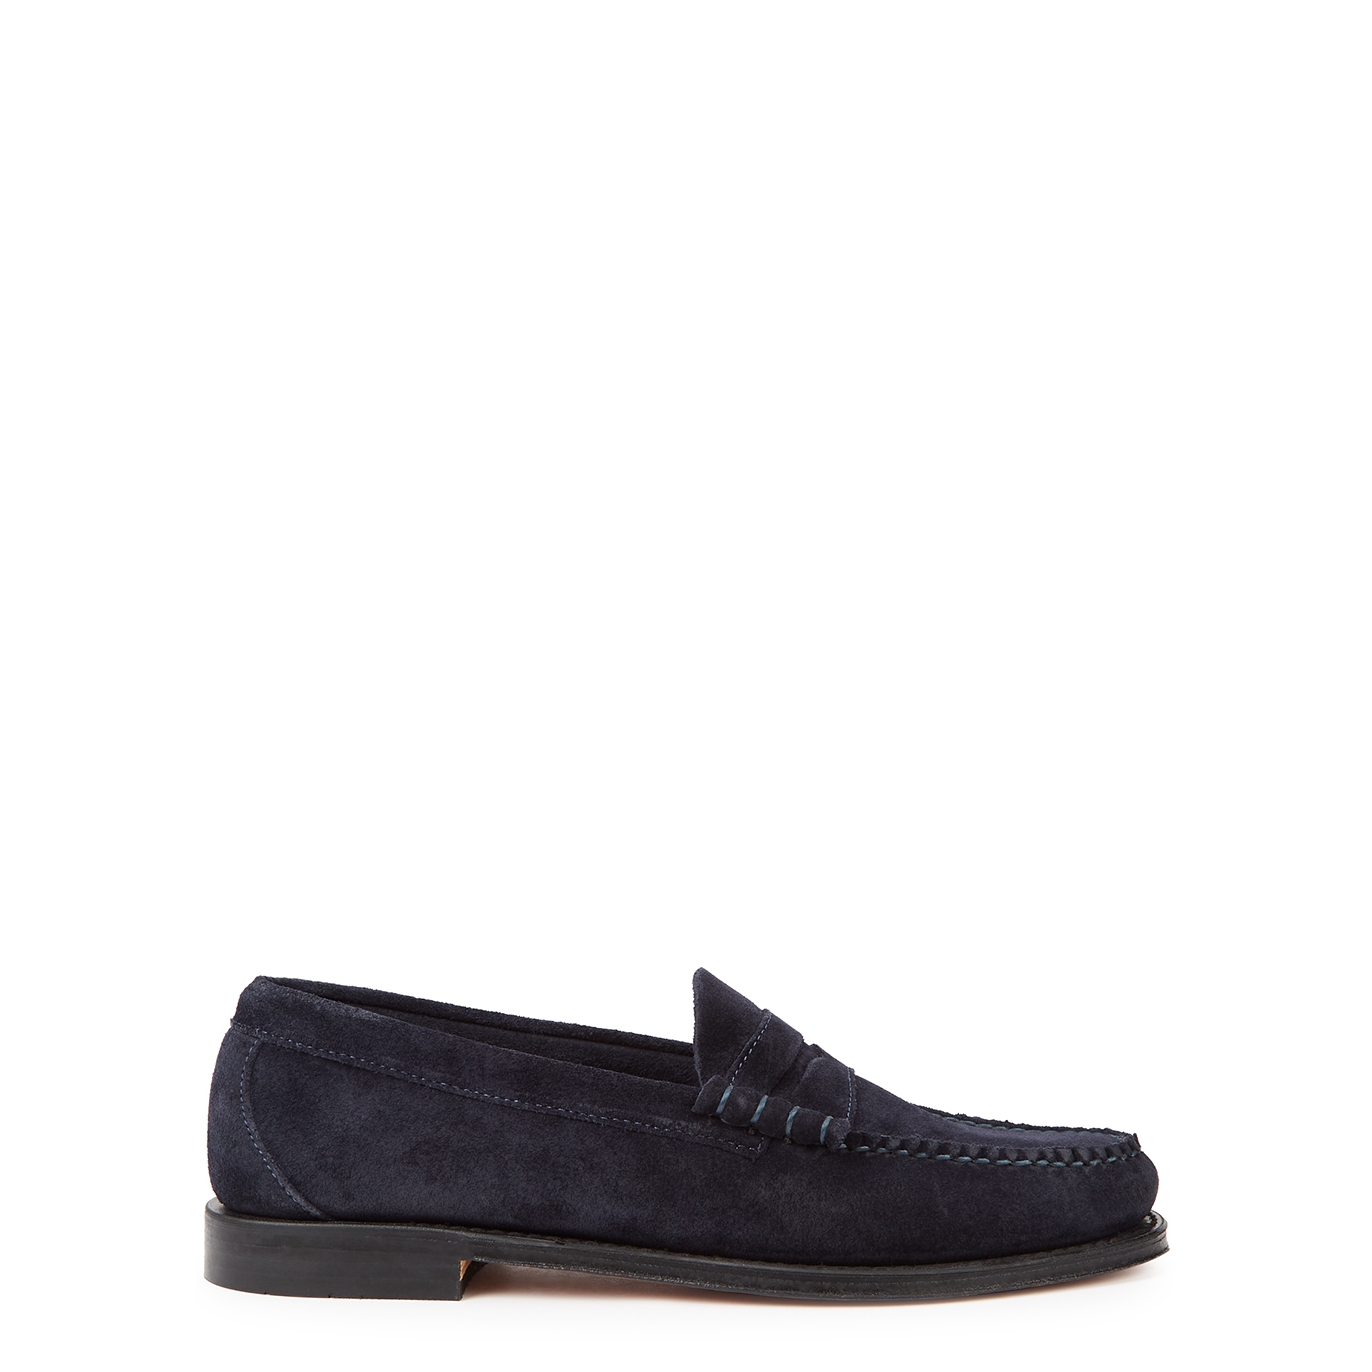 G.H Bass & Co Weejuns Heritage Larson Navy Suede Loafers - 6